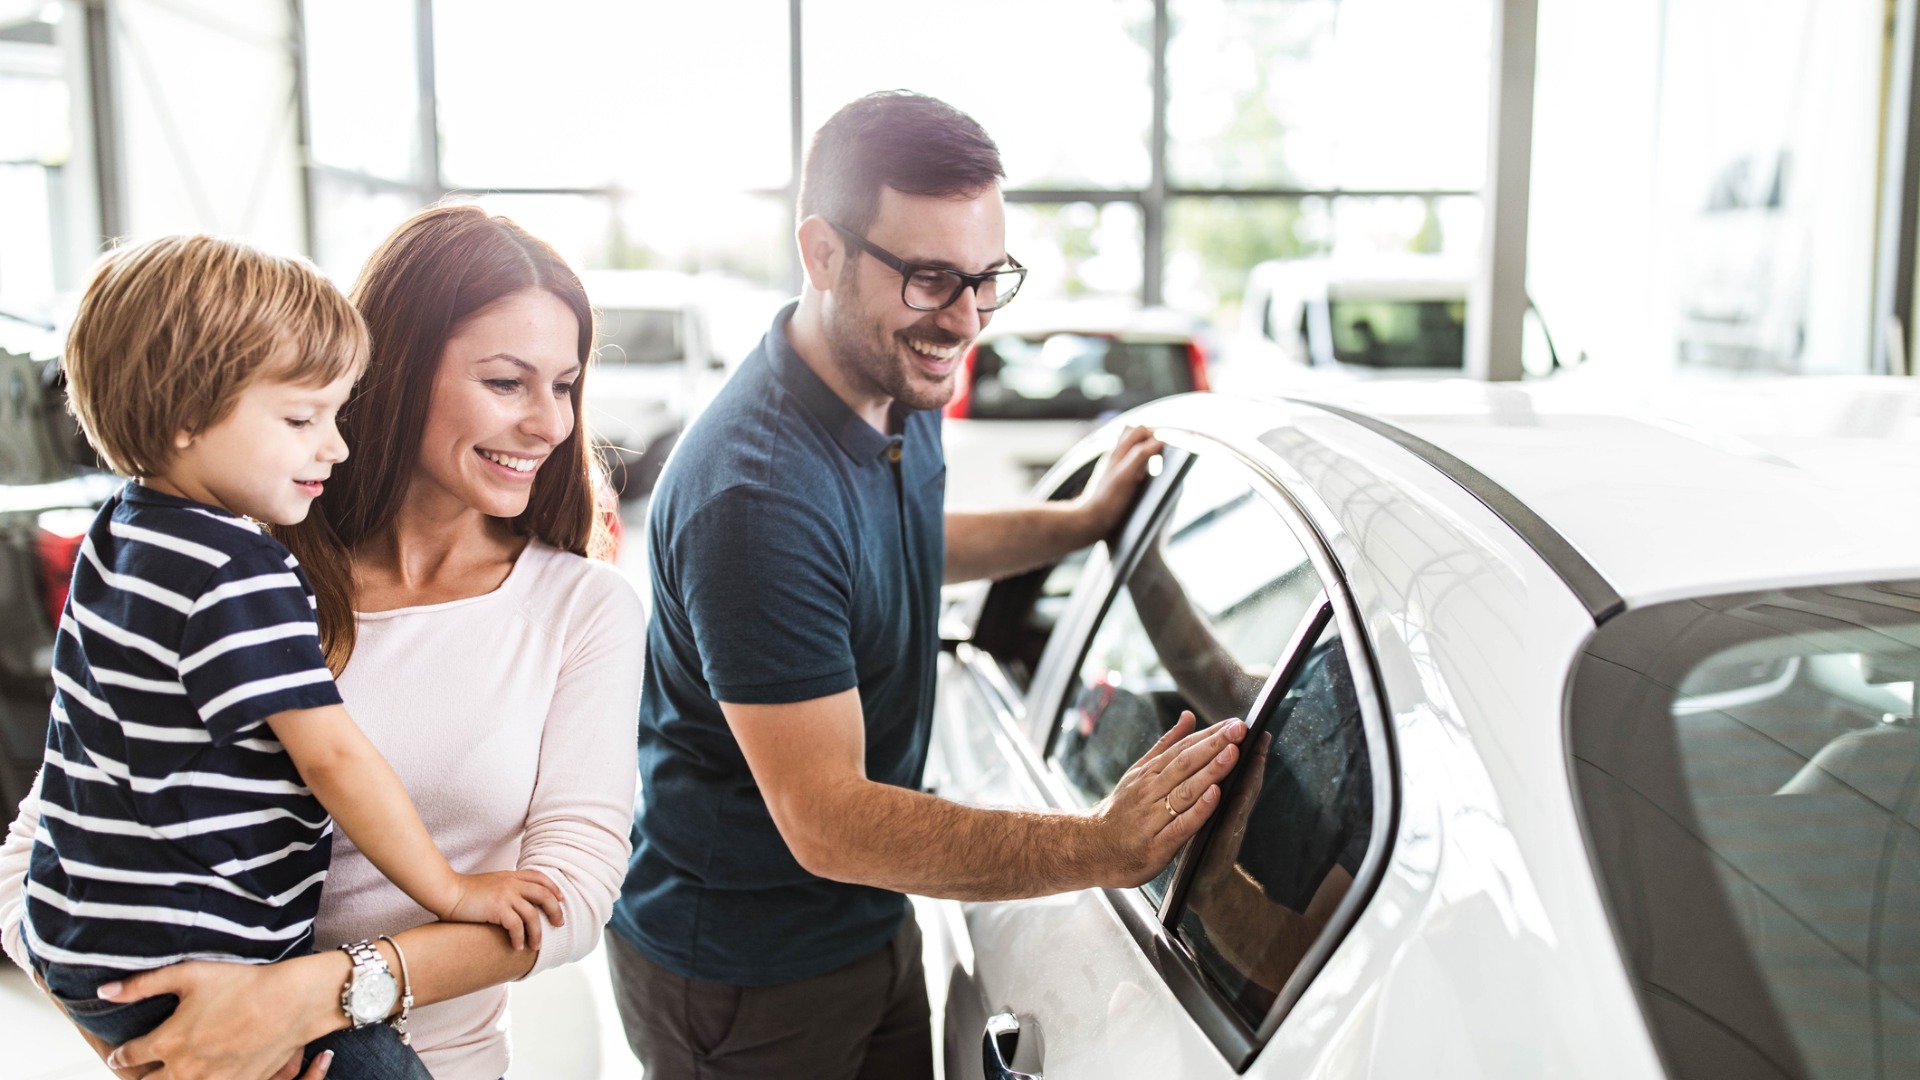 Family looking at new car in dealership - Buying a New Vehicle – Glass Coverage or No Coverage?